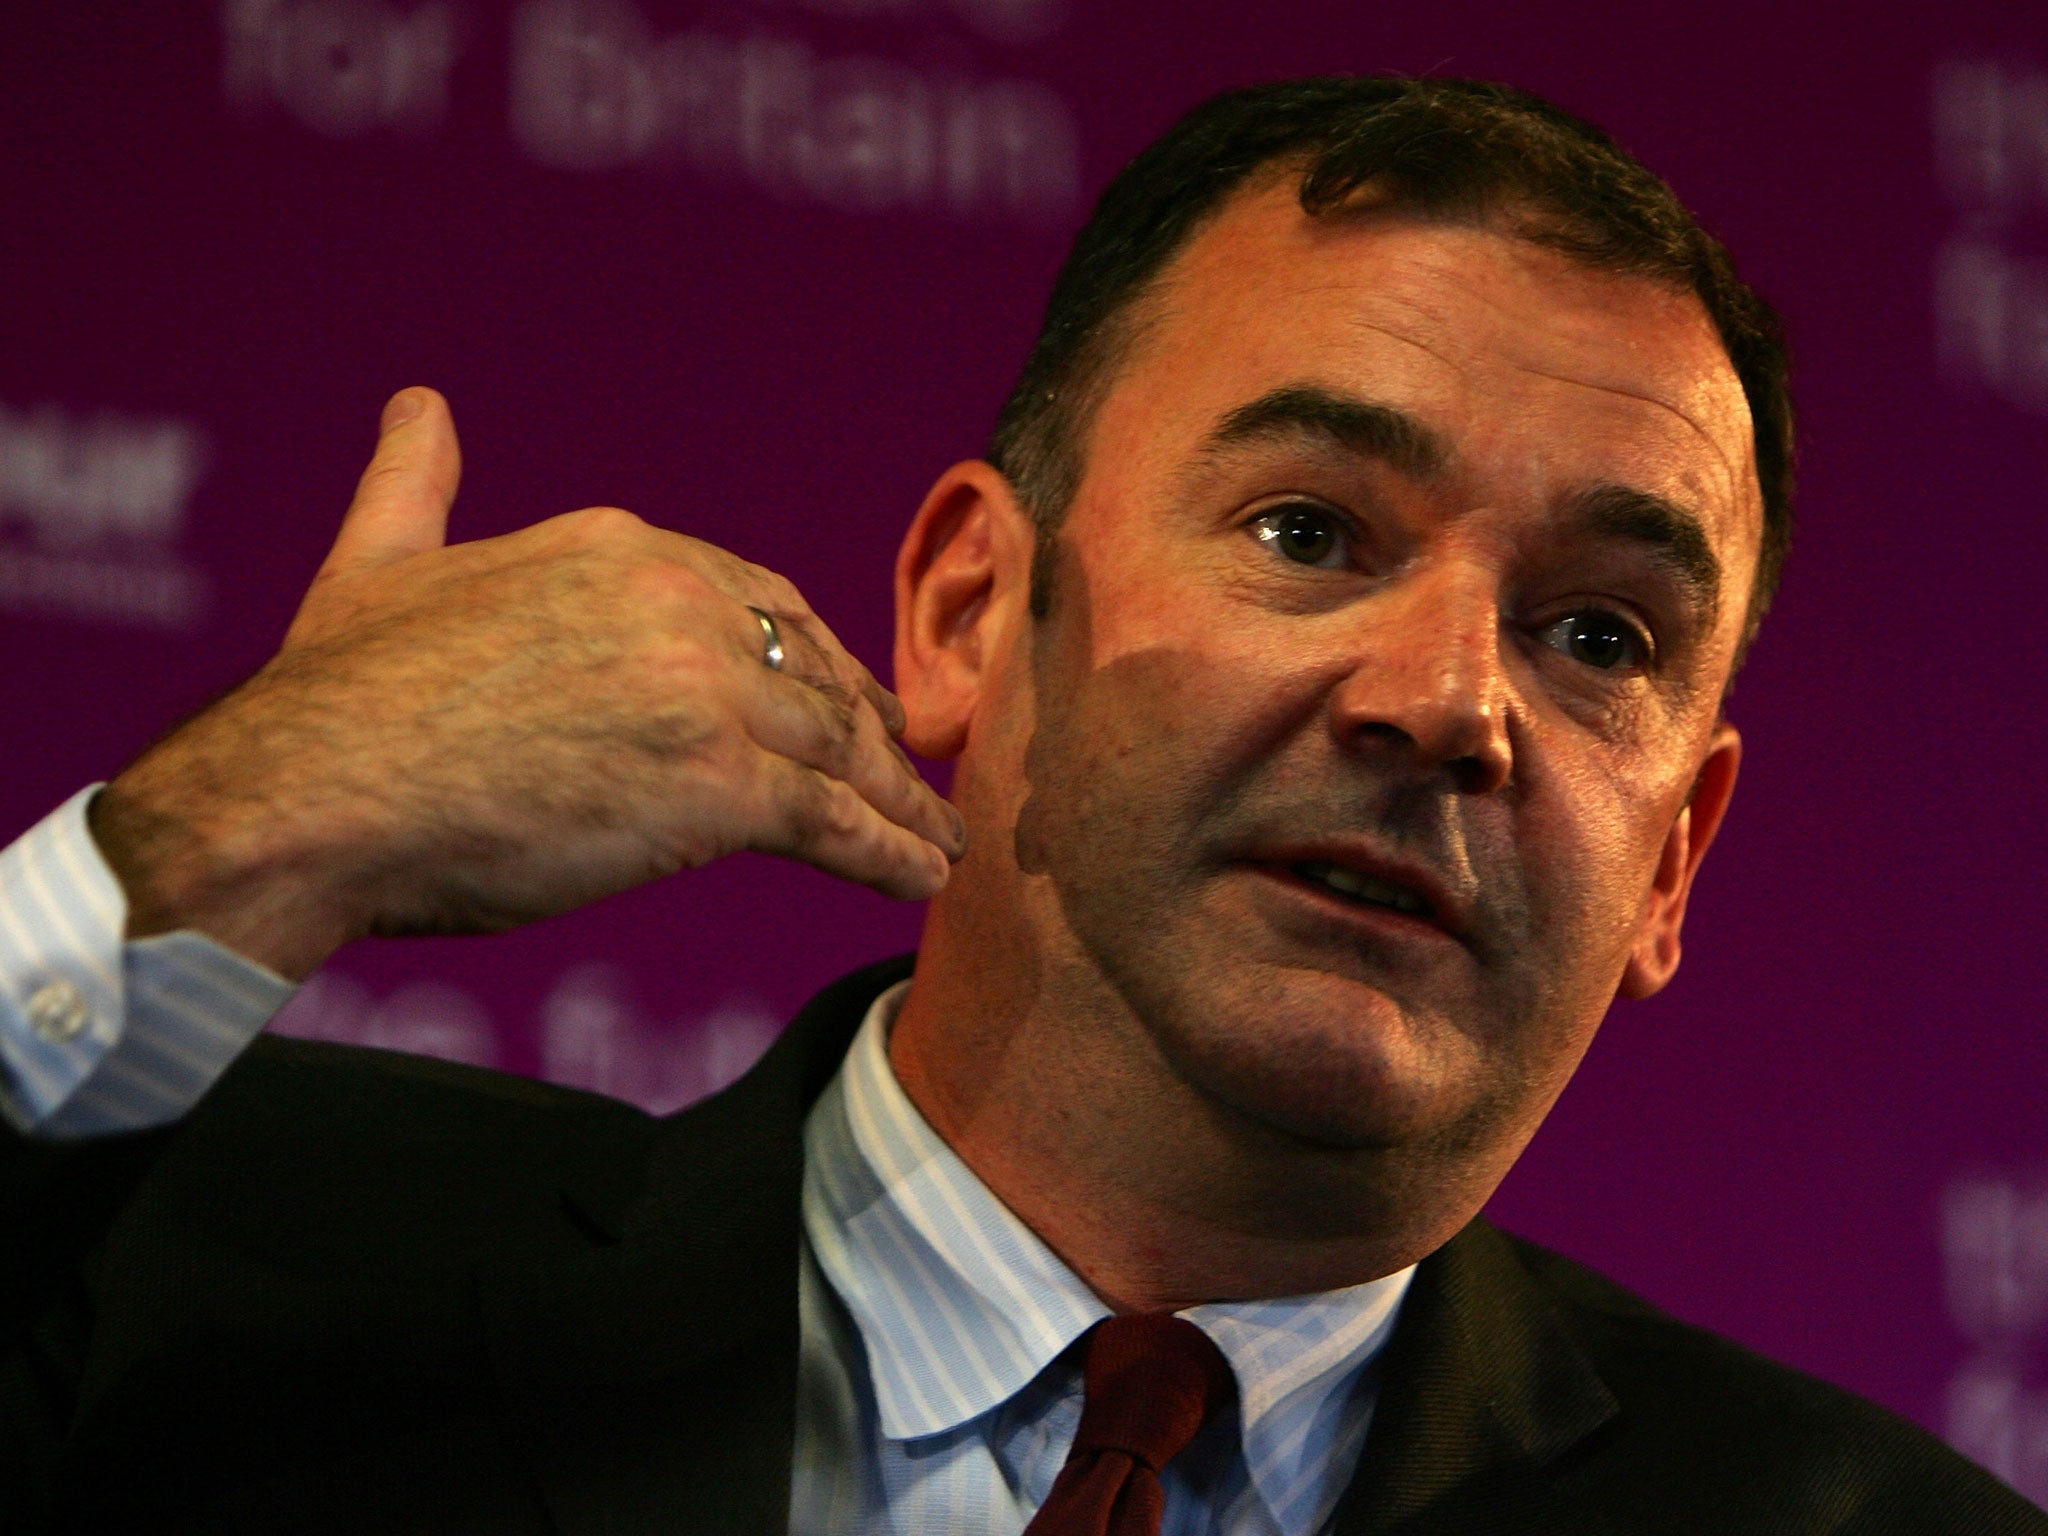 Jon Cruddas, who is heading the Labour leader’s policy review, said English people should learn from the Irish